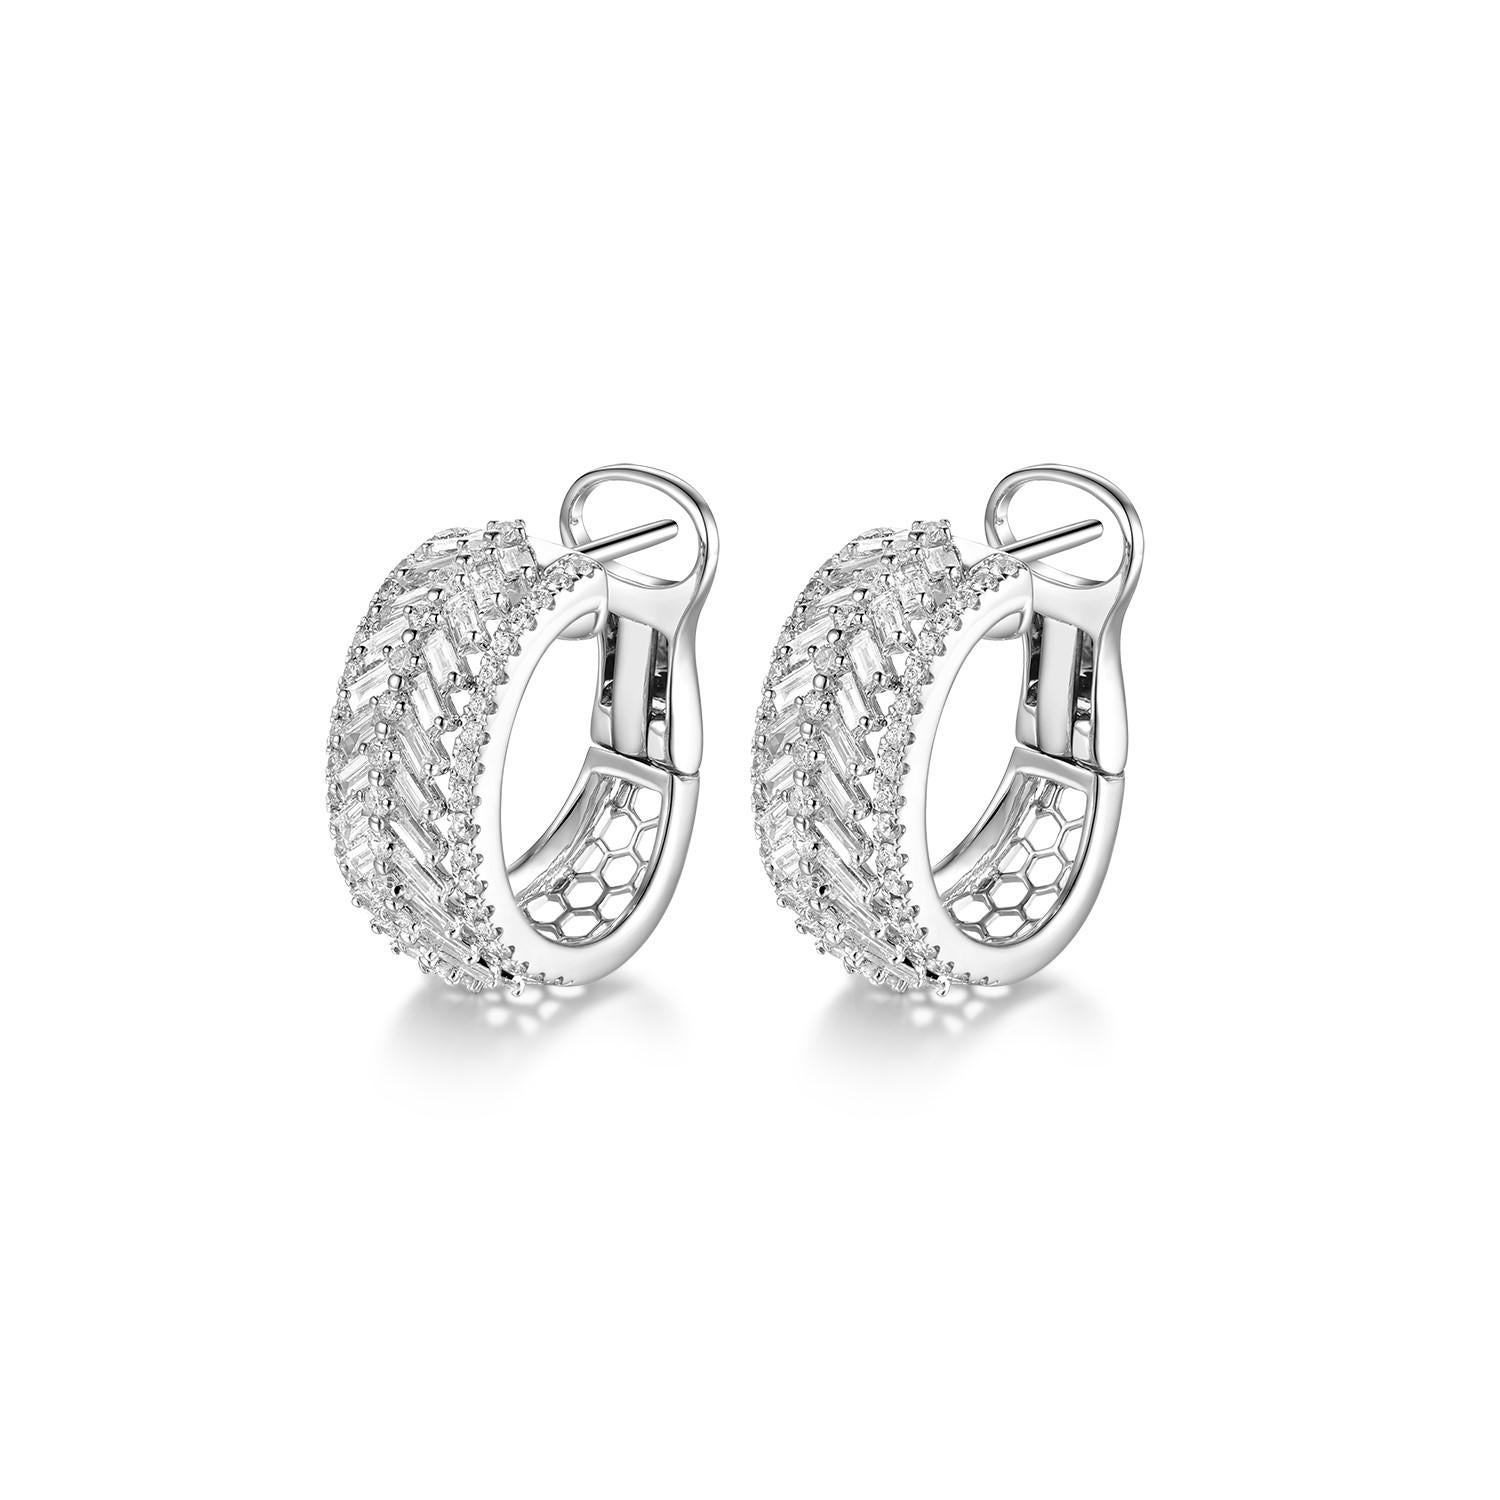 This hoop earrings feature 0.79 carat of taper diamonds, assented with 0.57 carats round diamonds on the side.  Earrings are set in 18 karat white gold.


18 Karat White Gold
Taper Diamonds 0.79 carat 
Round Diamonds 0.57 carat
